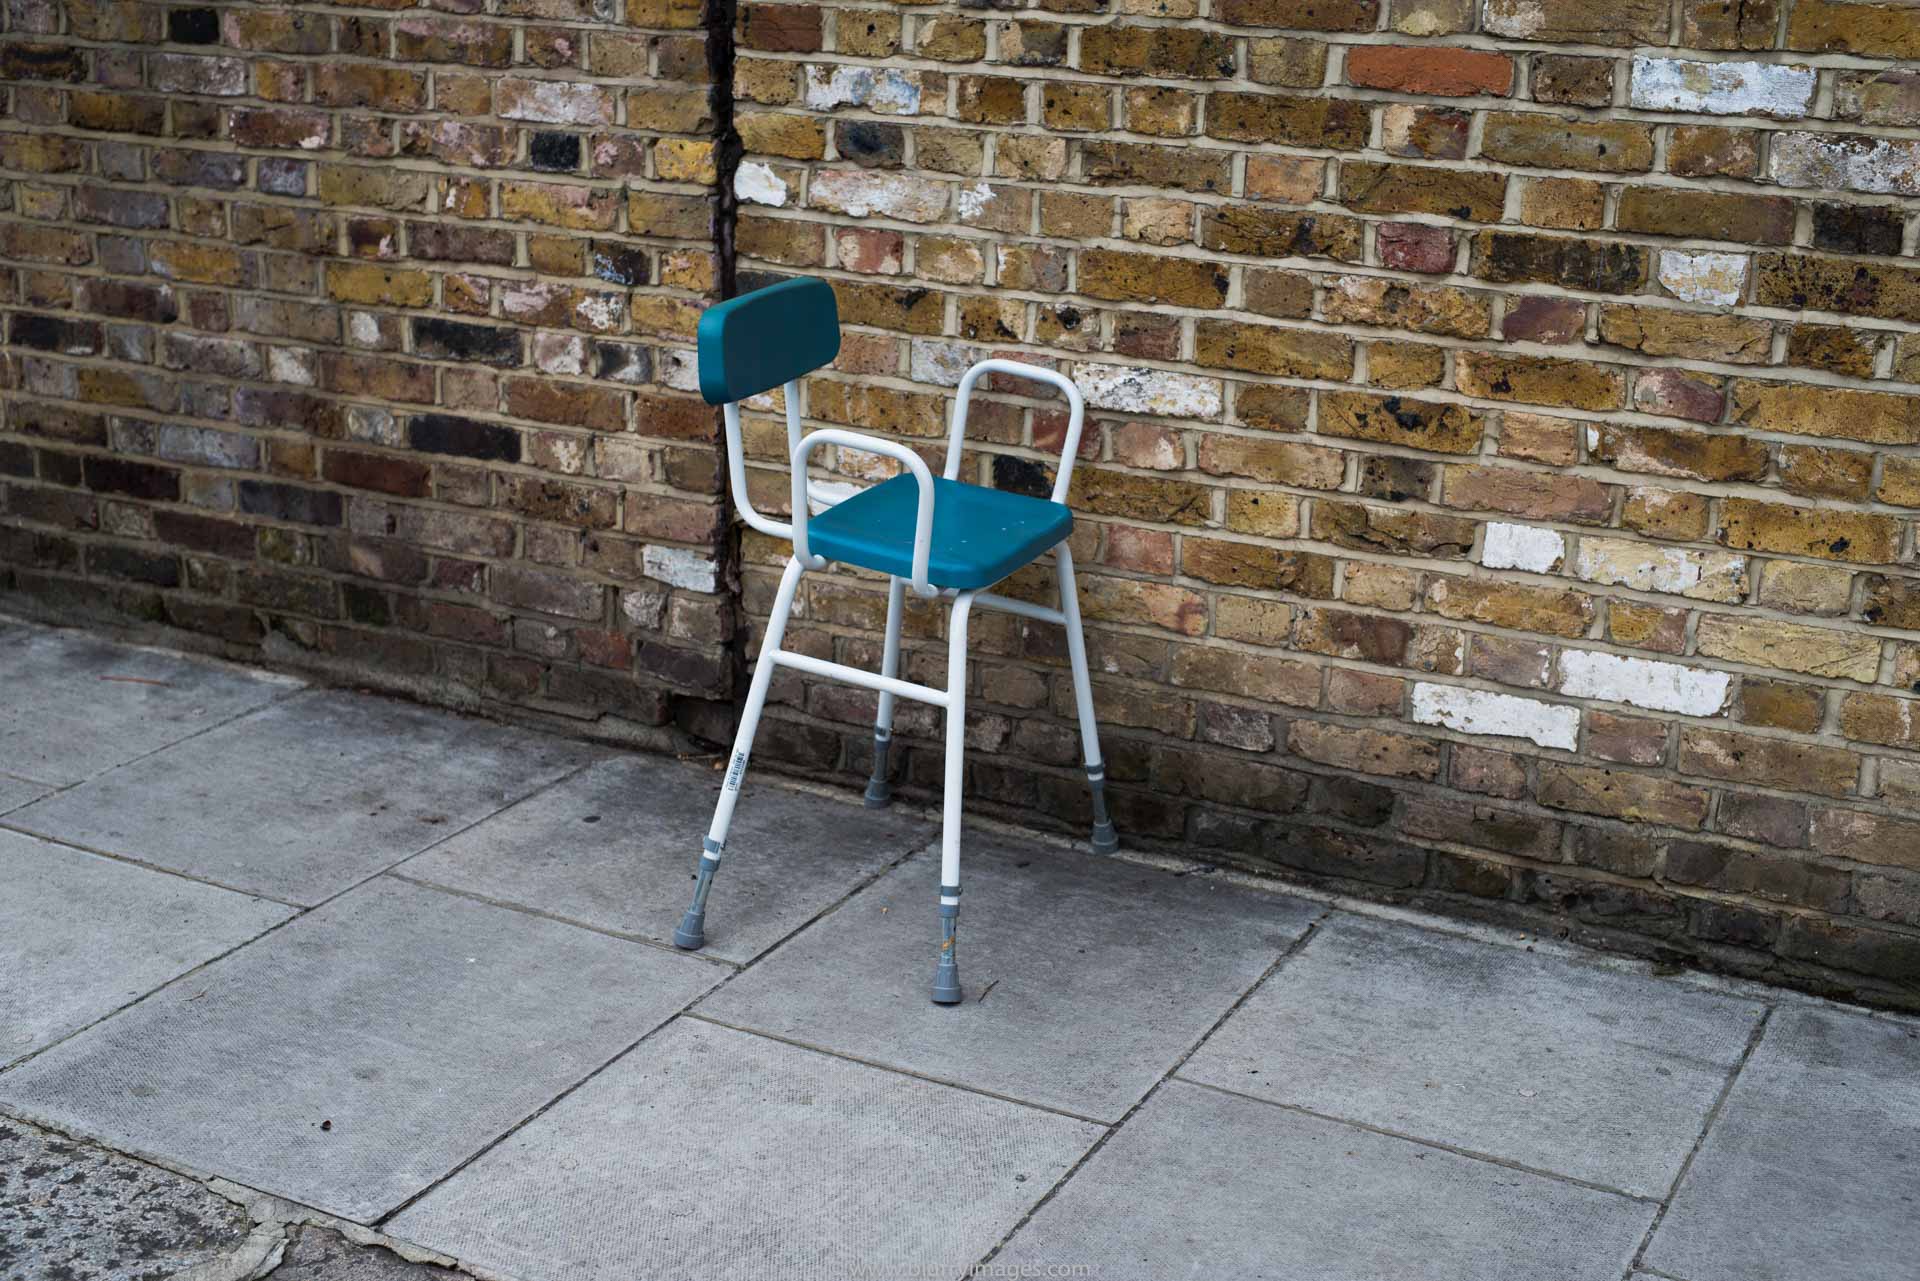 chair, 2015, no people, colour image, horizontal, outdoor furniture, photography, wall - building feature, blue chair, white arm, chair on a pavement, red brick, outdoors,